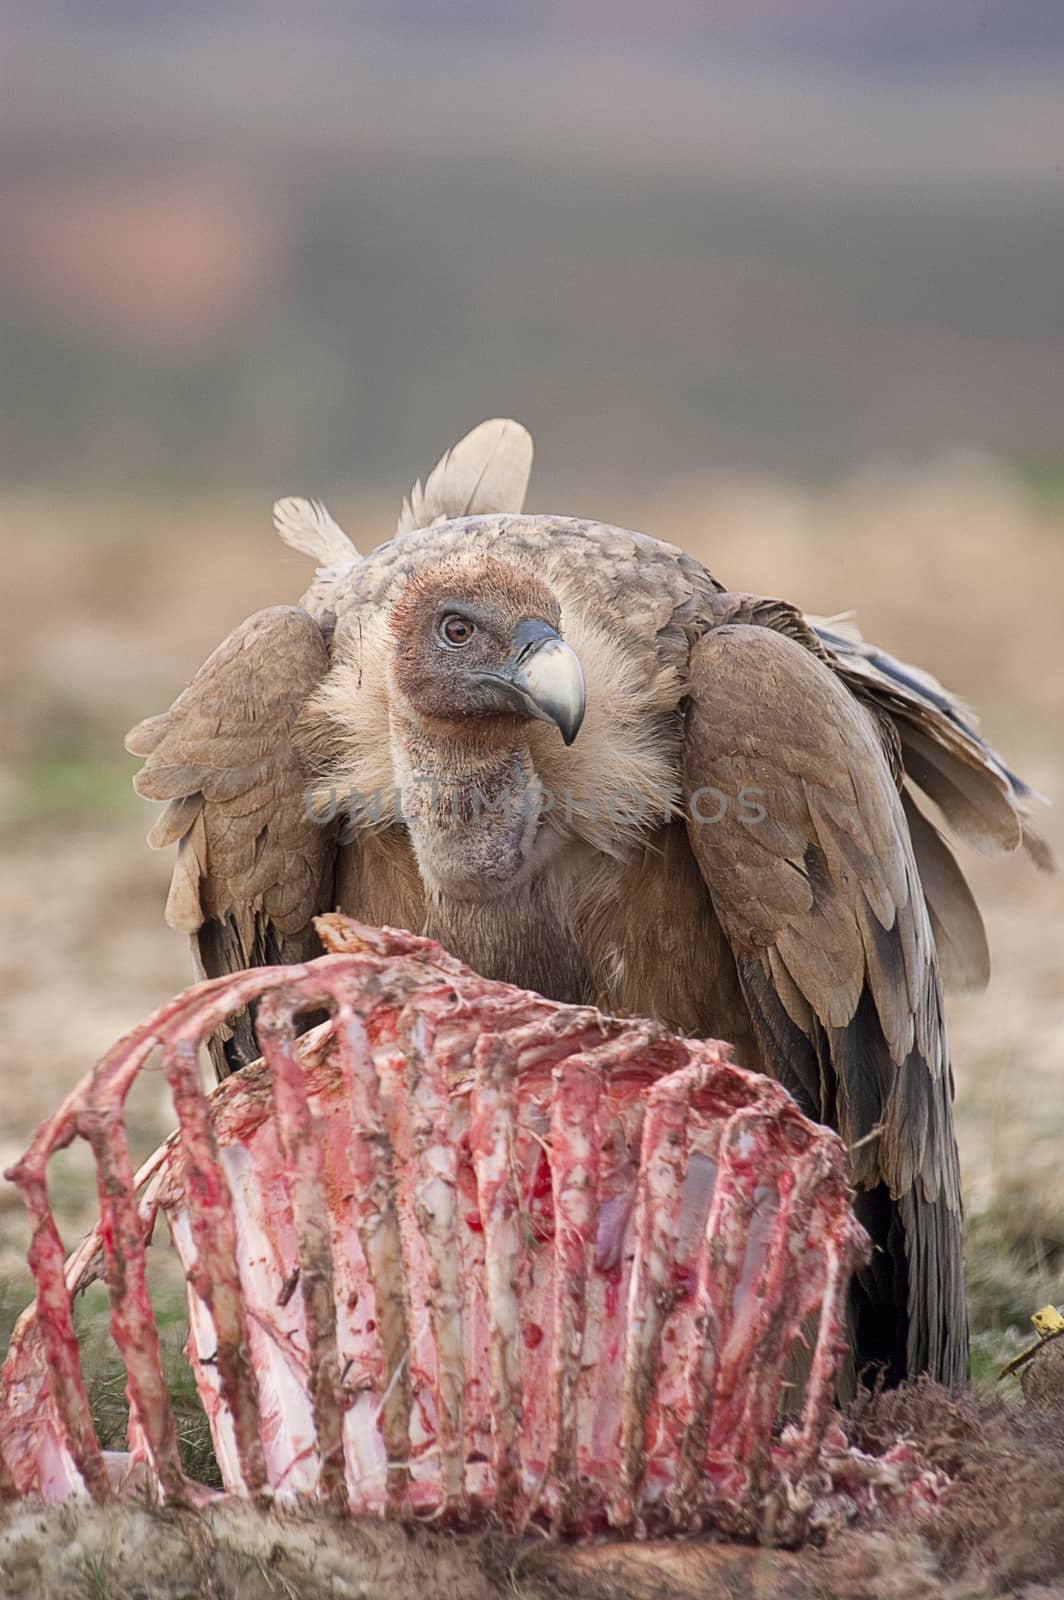 Griffon Vulture (Gyps fulvus) eating carrion, bones and meat  by jalonsohu@gmail.com